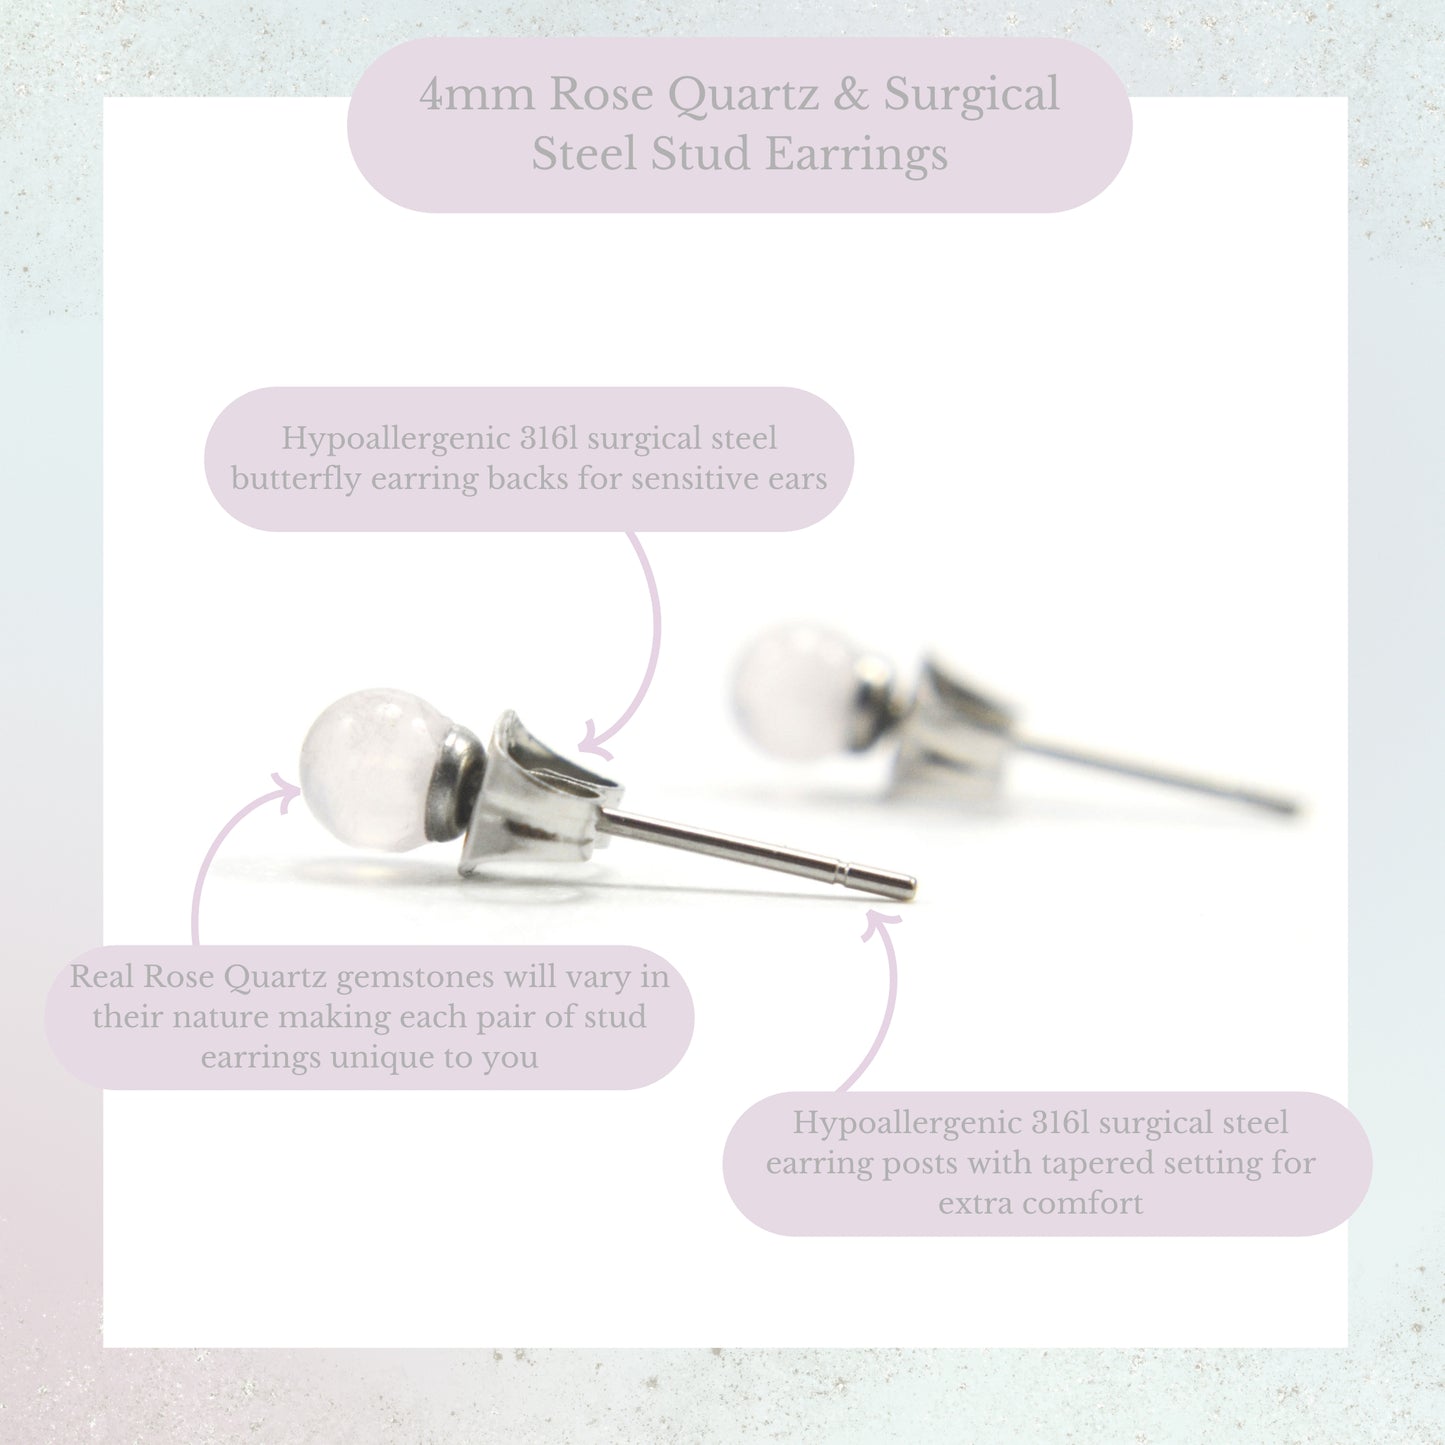 Product information graphic for 4mm Rose Quartz & surgical steel stud earrings